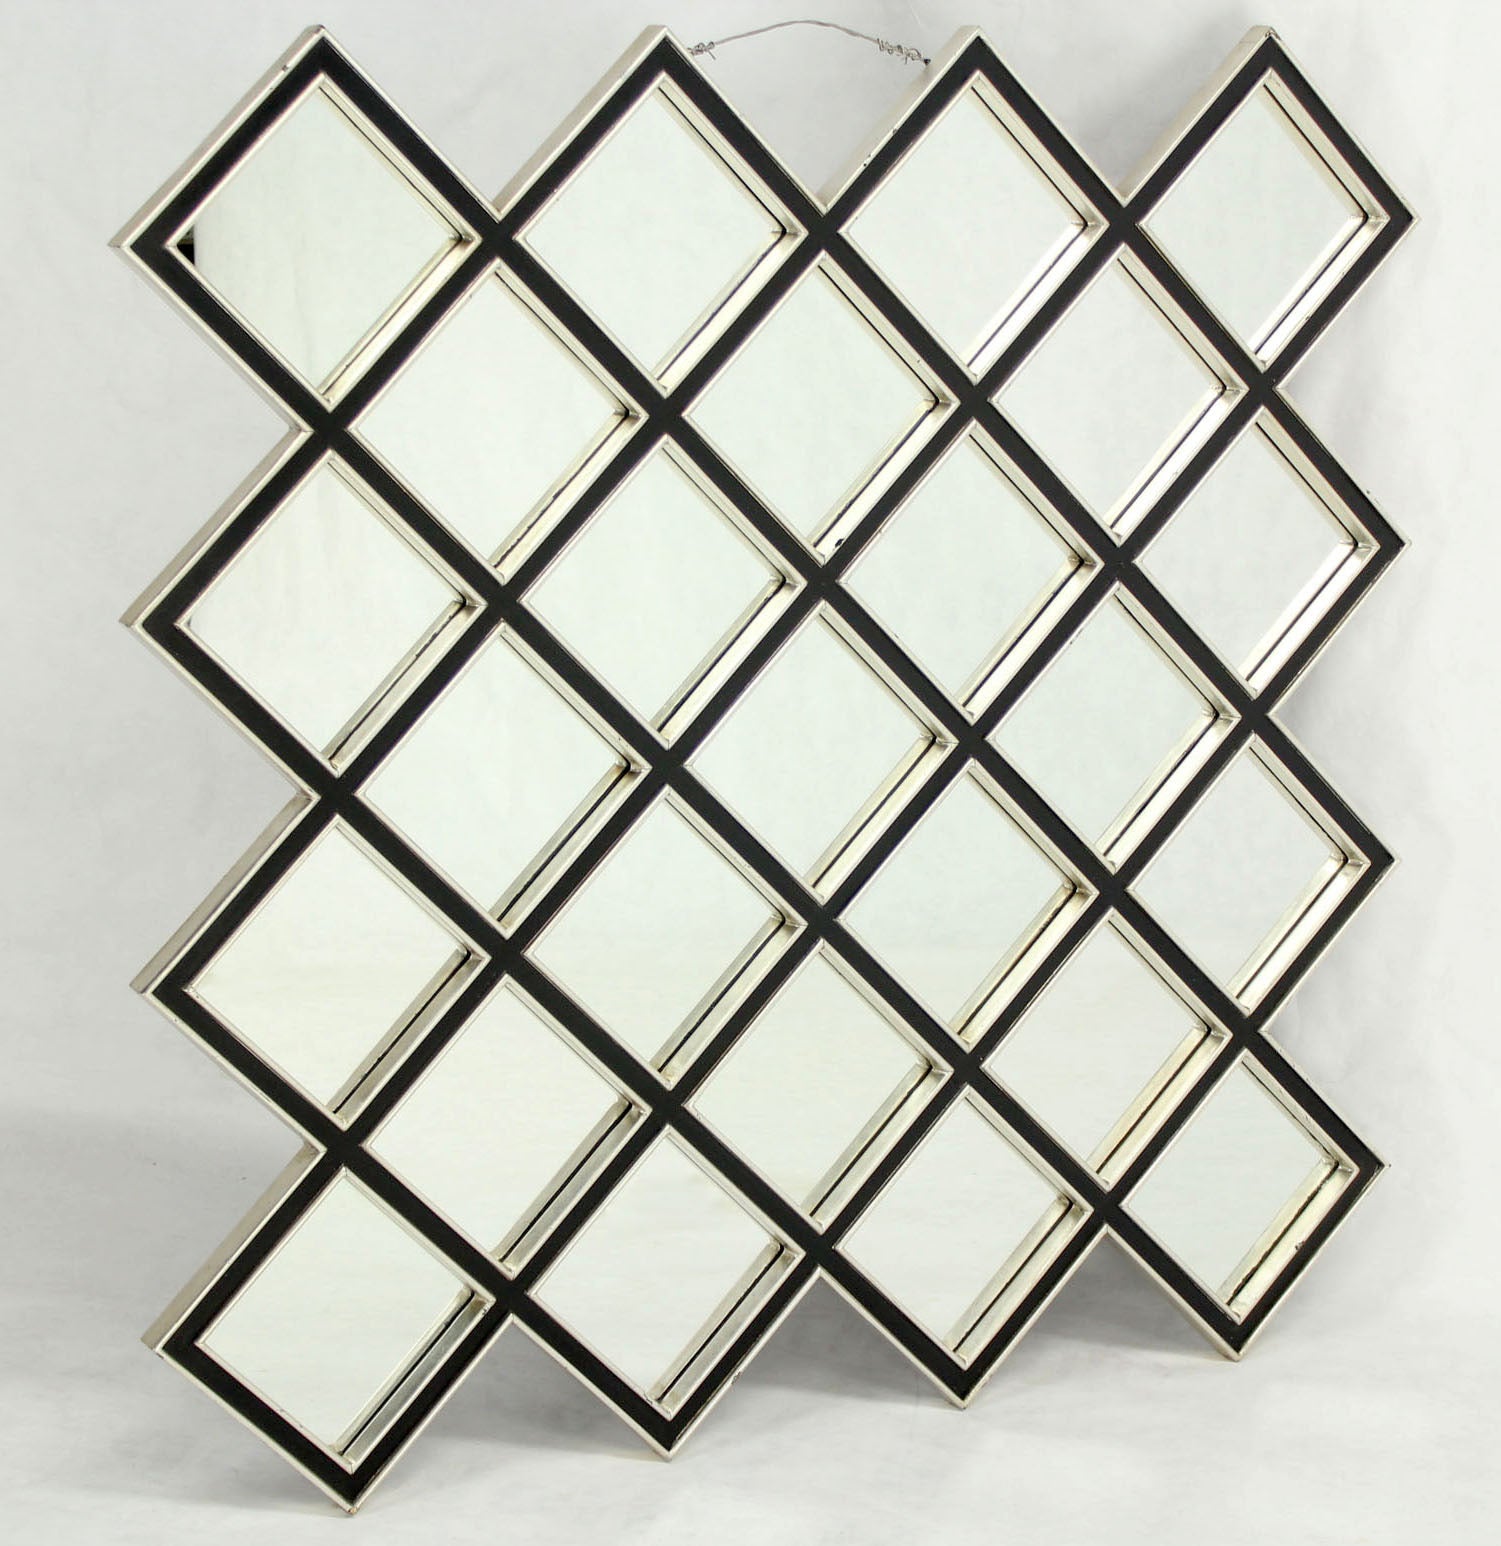 Large Square Mirror with Wood Frame, Composed of 25 "Tiles"